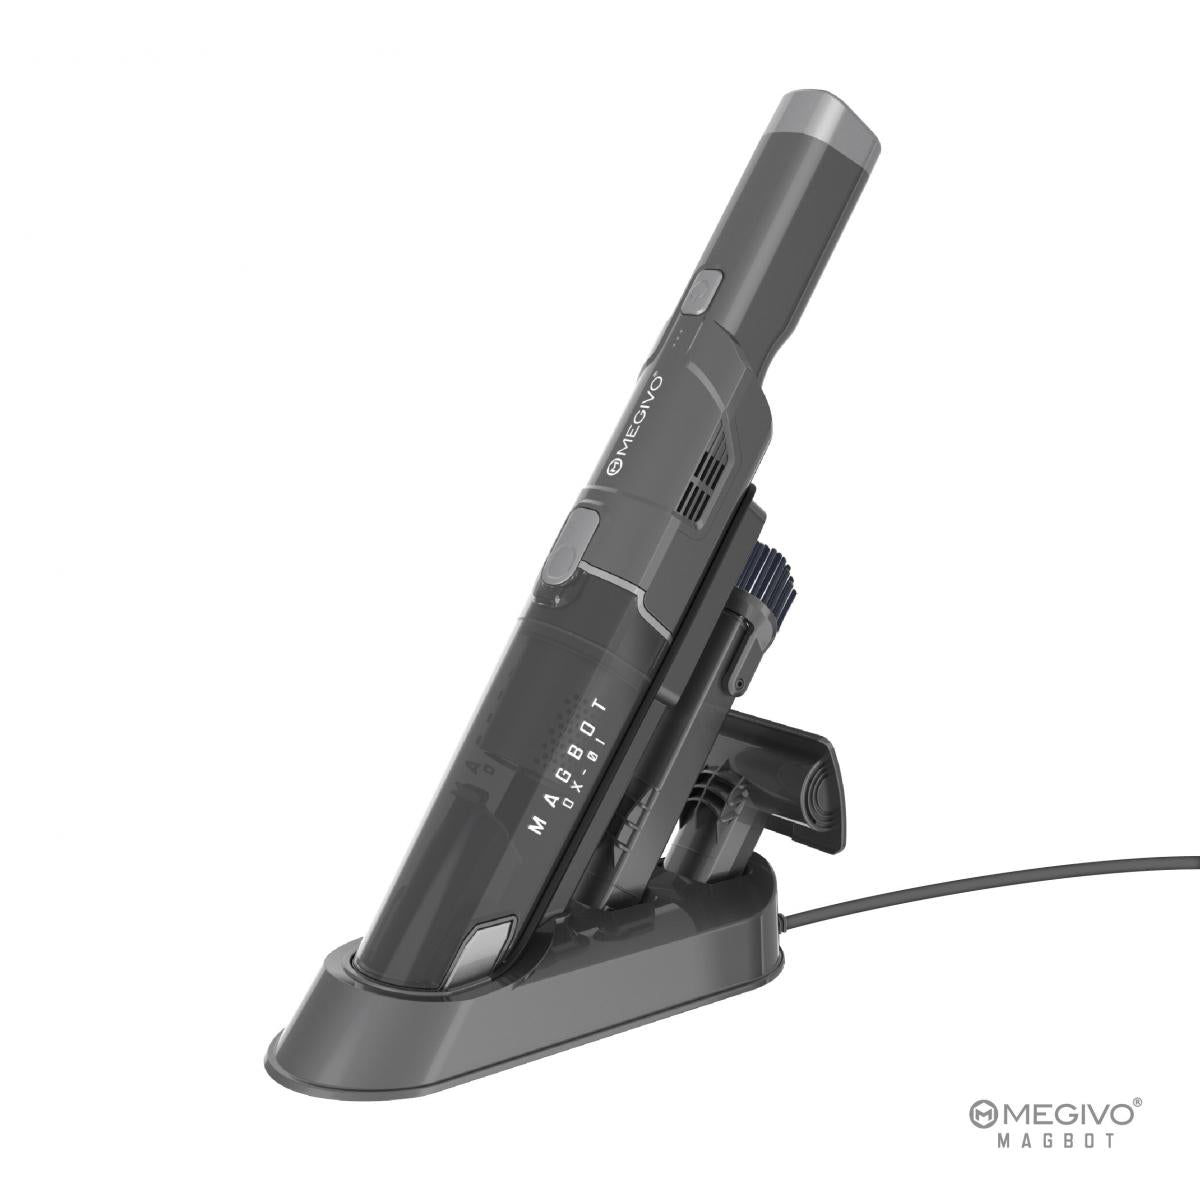 Megivo - Magbot OX-01 lightweight cordless portable vacuum cleaner